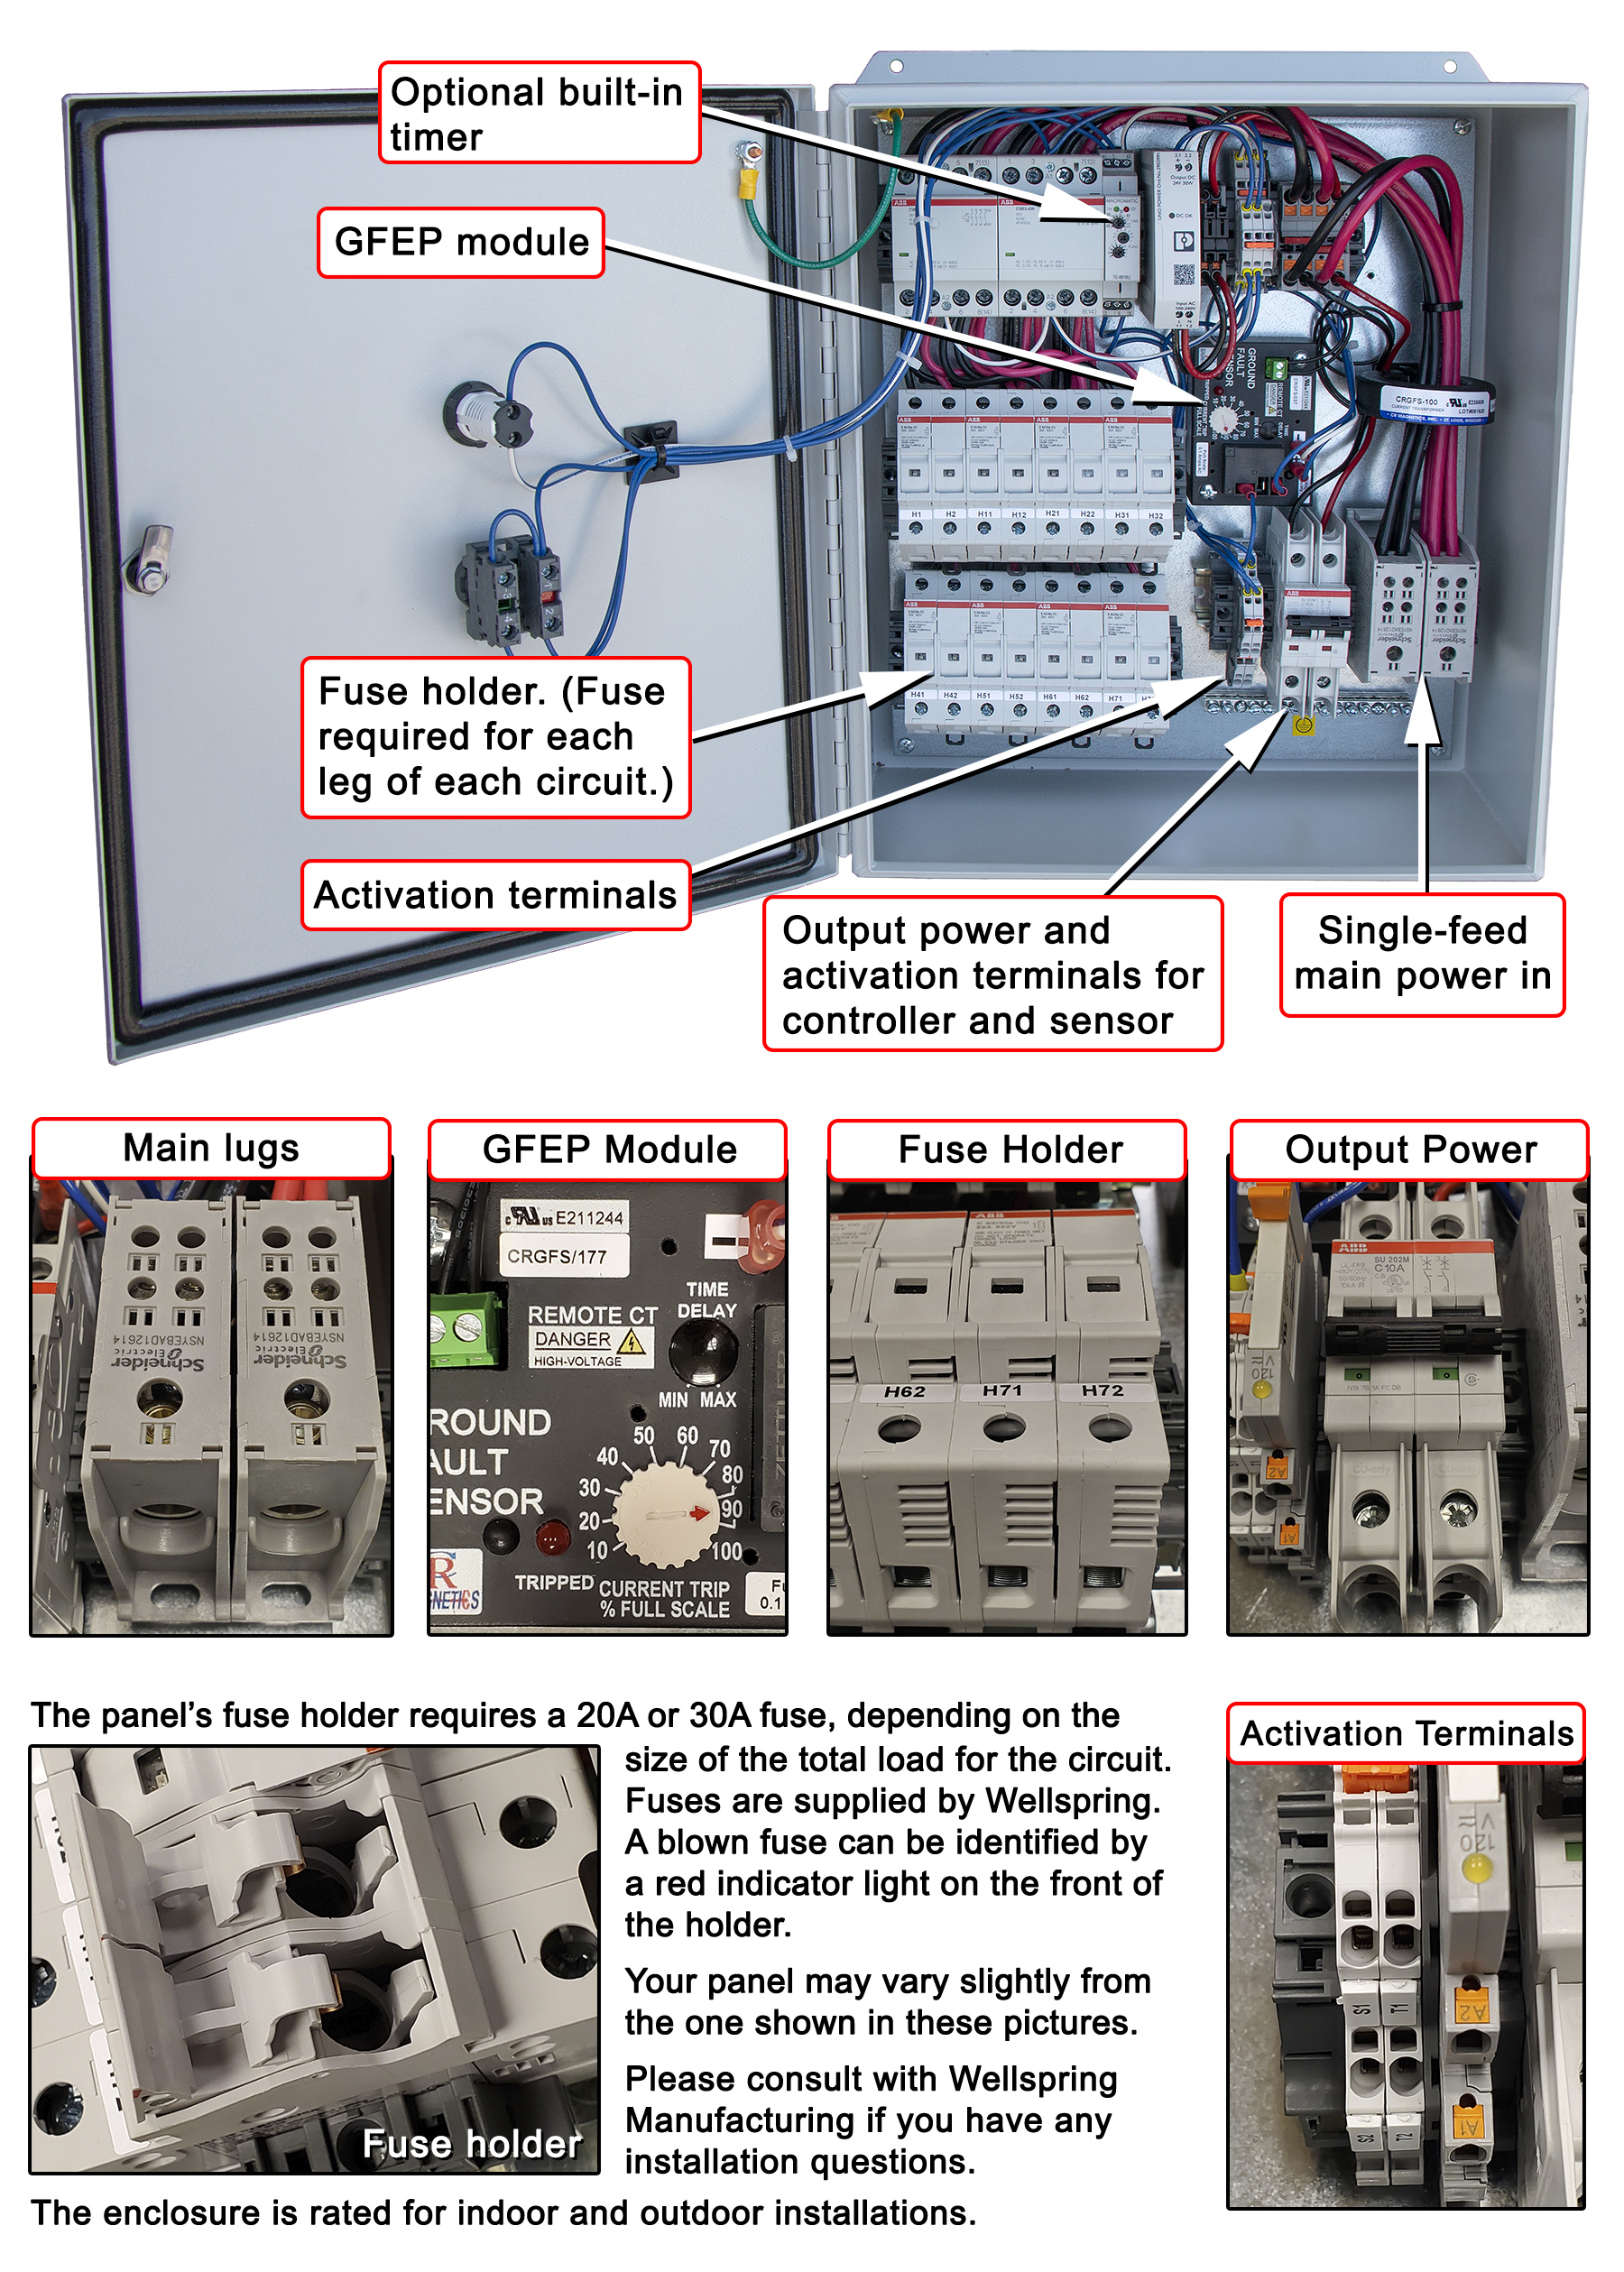 The new single-feed contactor panel with callouts